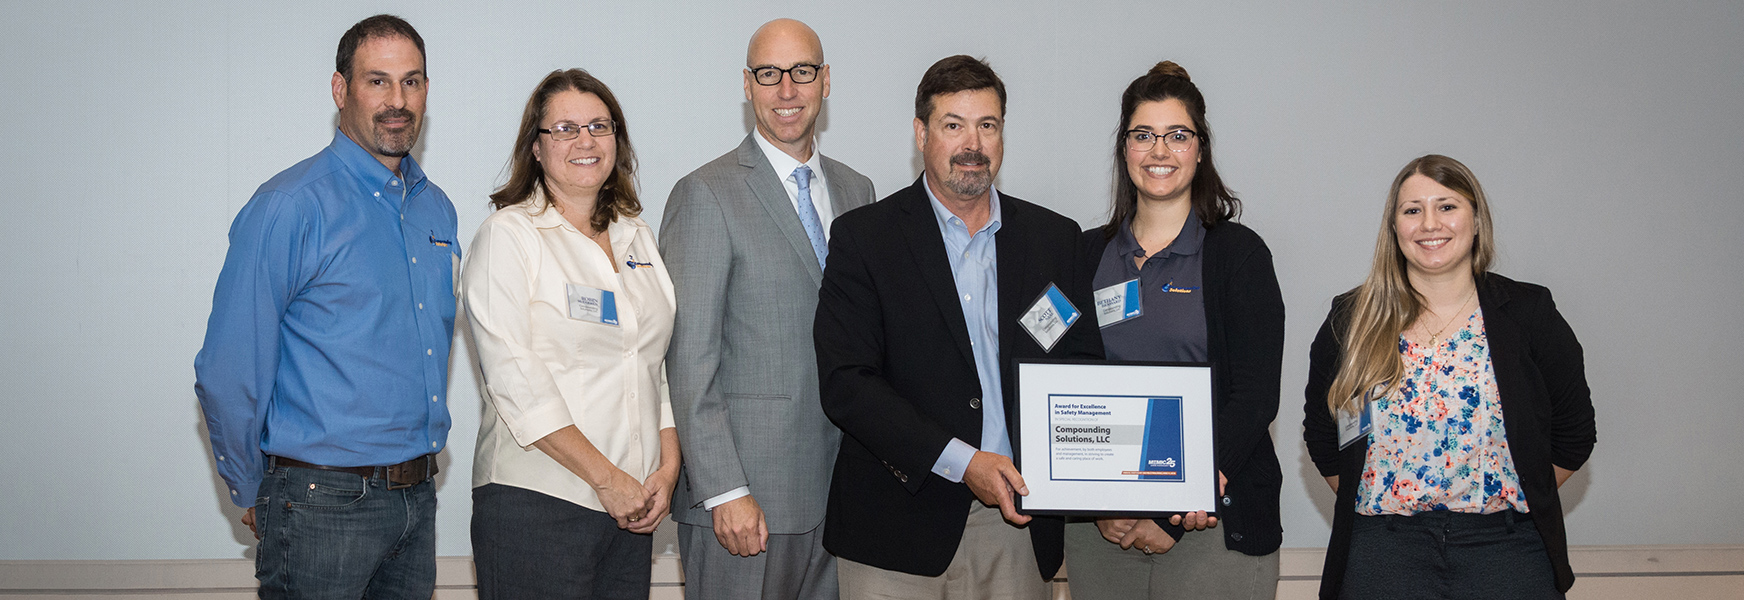 Compound Solutions honored with safety award at MEMIC's Annual Meeting of the Policyholders